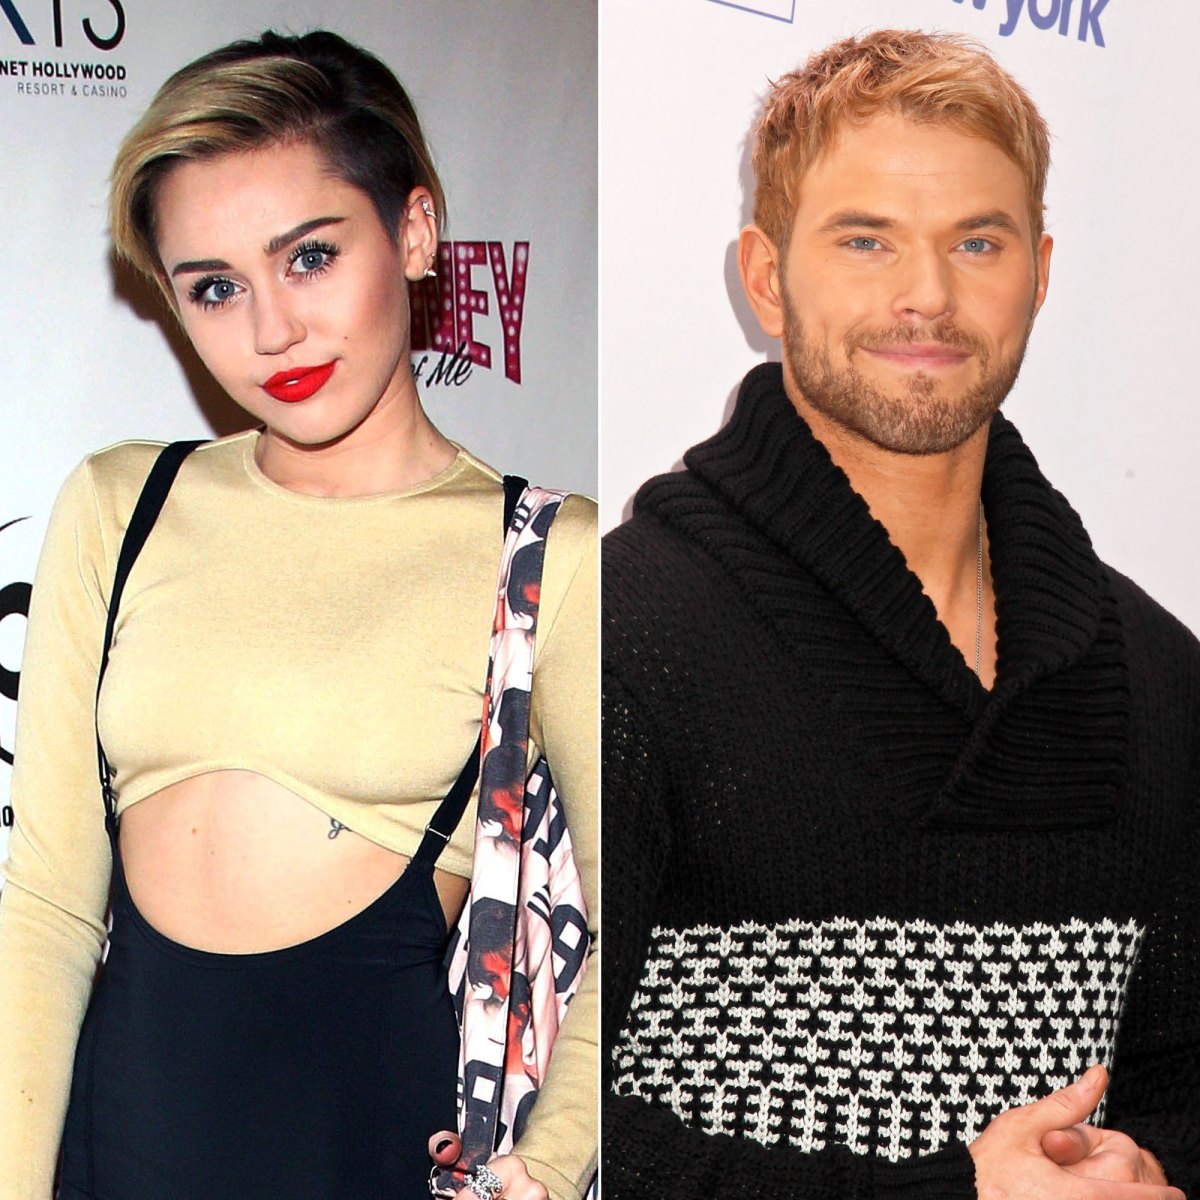 Miley Cyrus Interracial Xxx - Miley Cyrus' Dating History: Timeline of Her Famous Exes, Flings